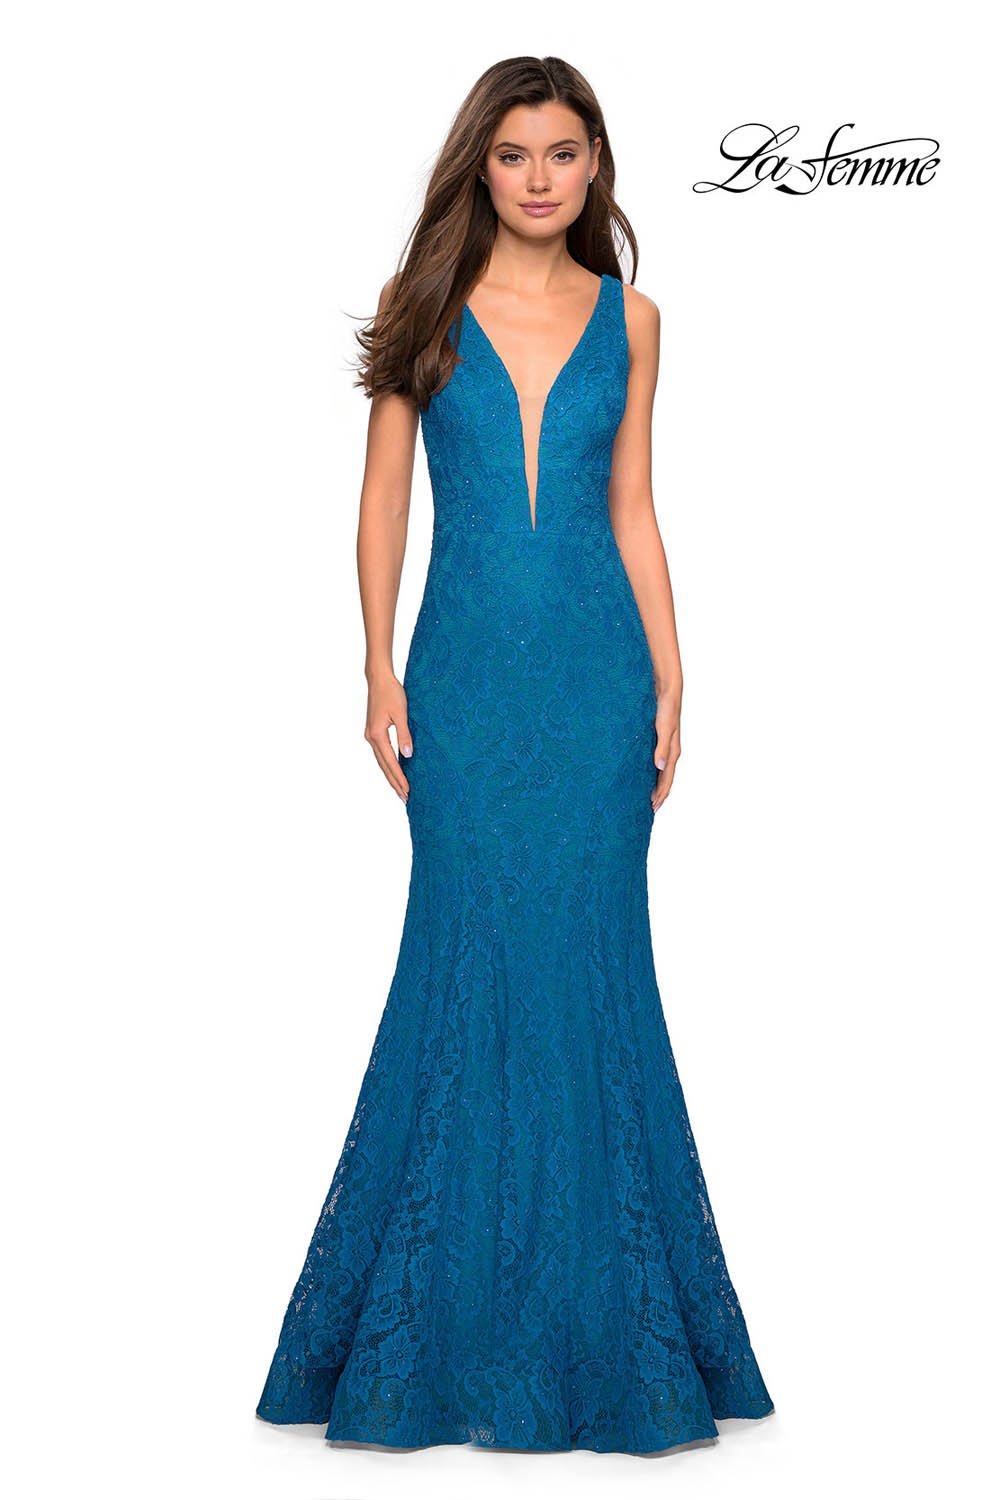 La Femme 27464 dress images in these colors: Dark Berry, Dark Turquoise, Electric Blue, Navy.